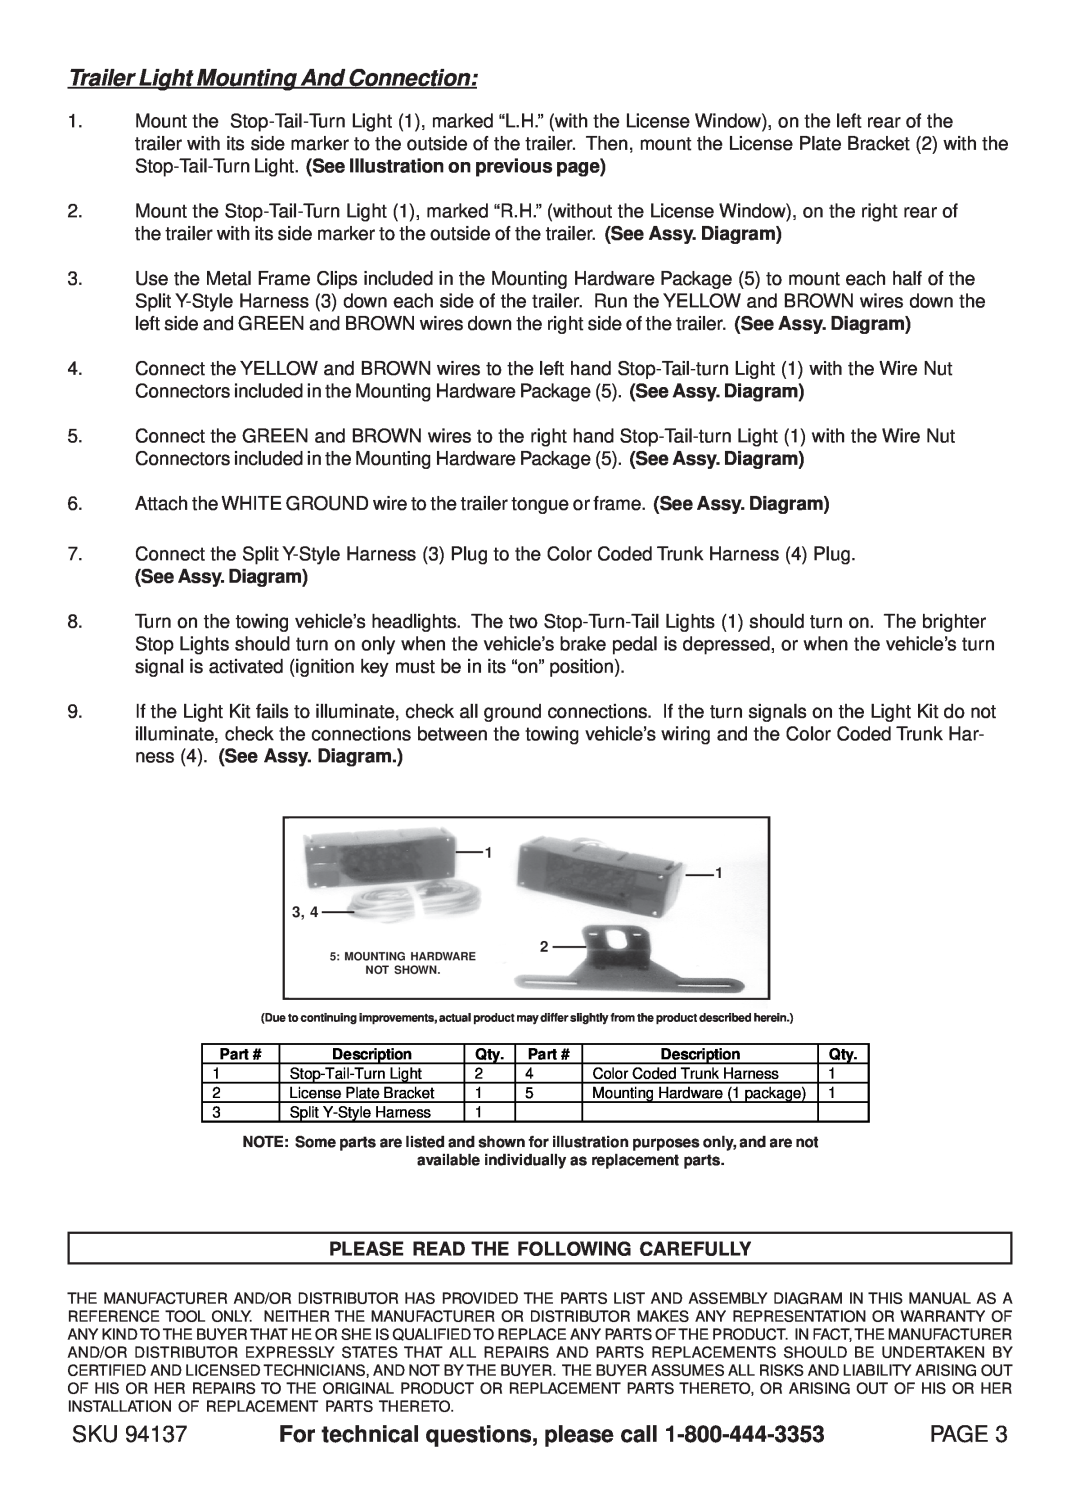 Harbor Freight Tools 94137 specifications Trailer Light Mounting And Connection, For technical questions, please call, Page 